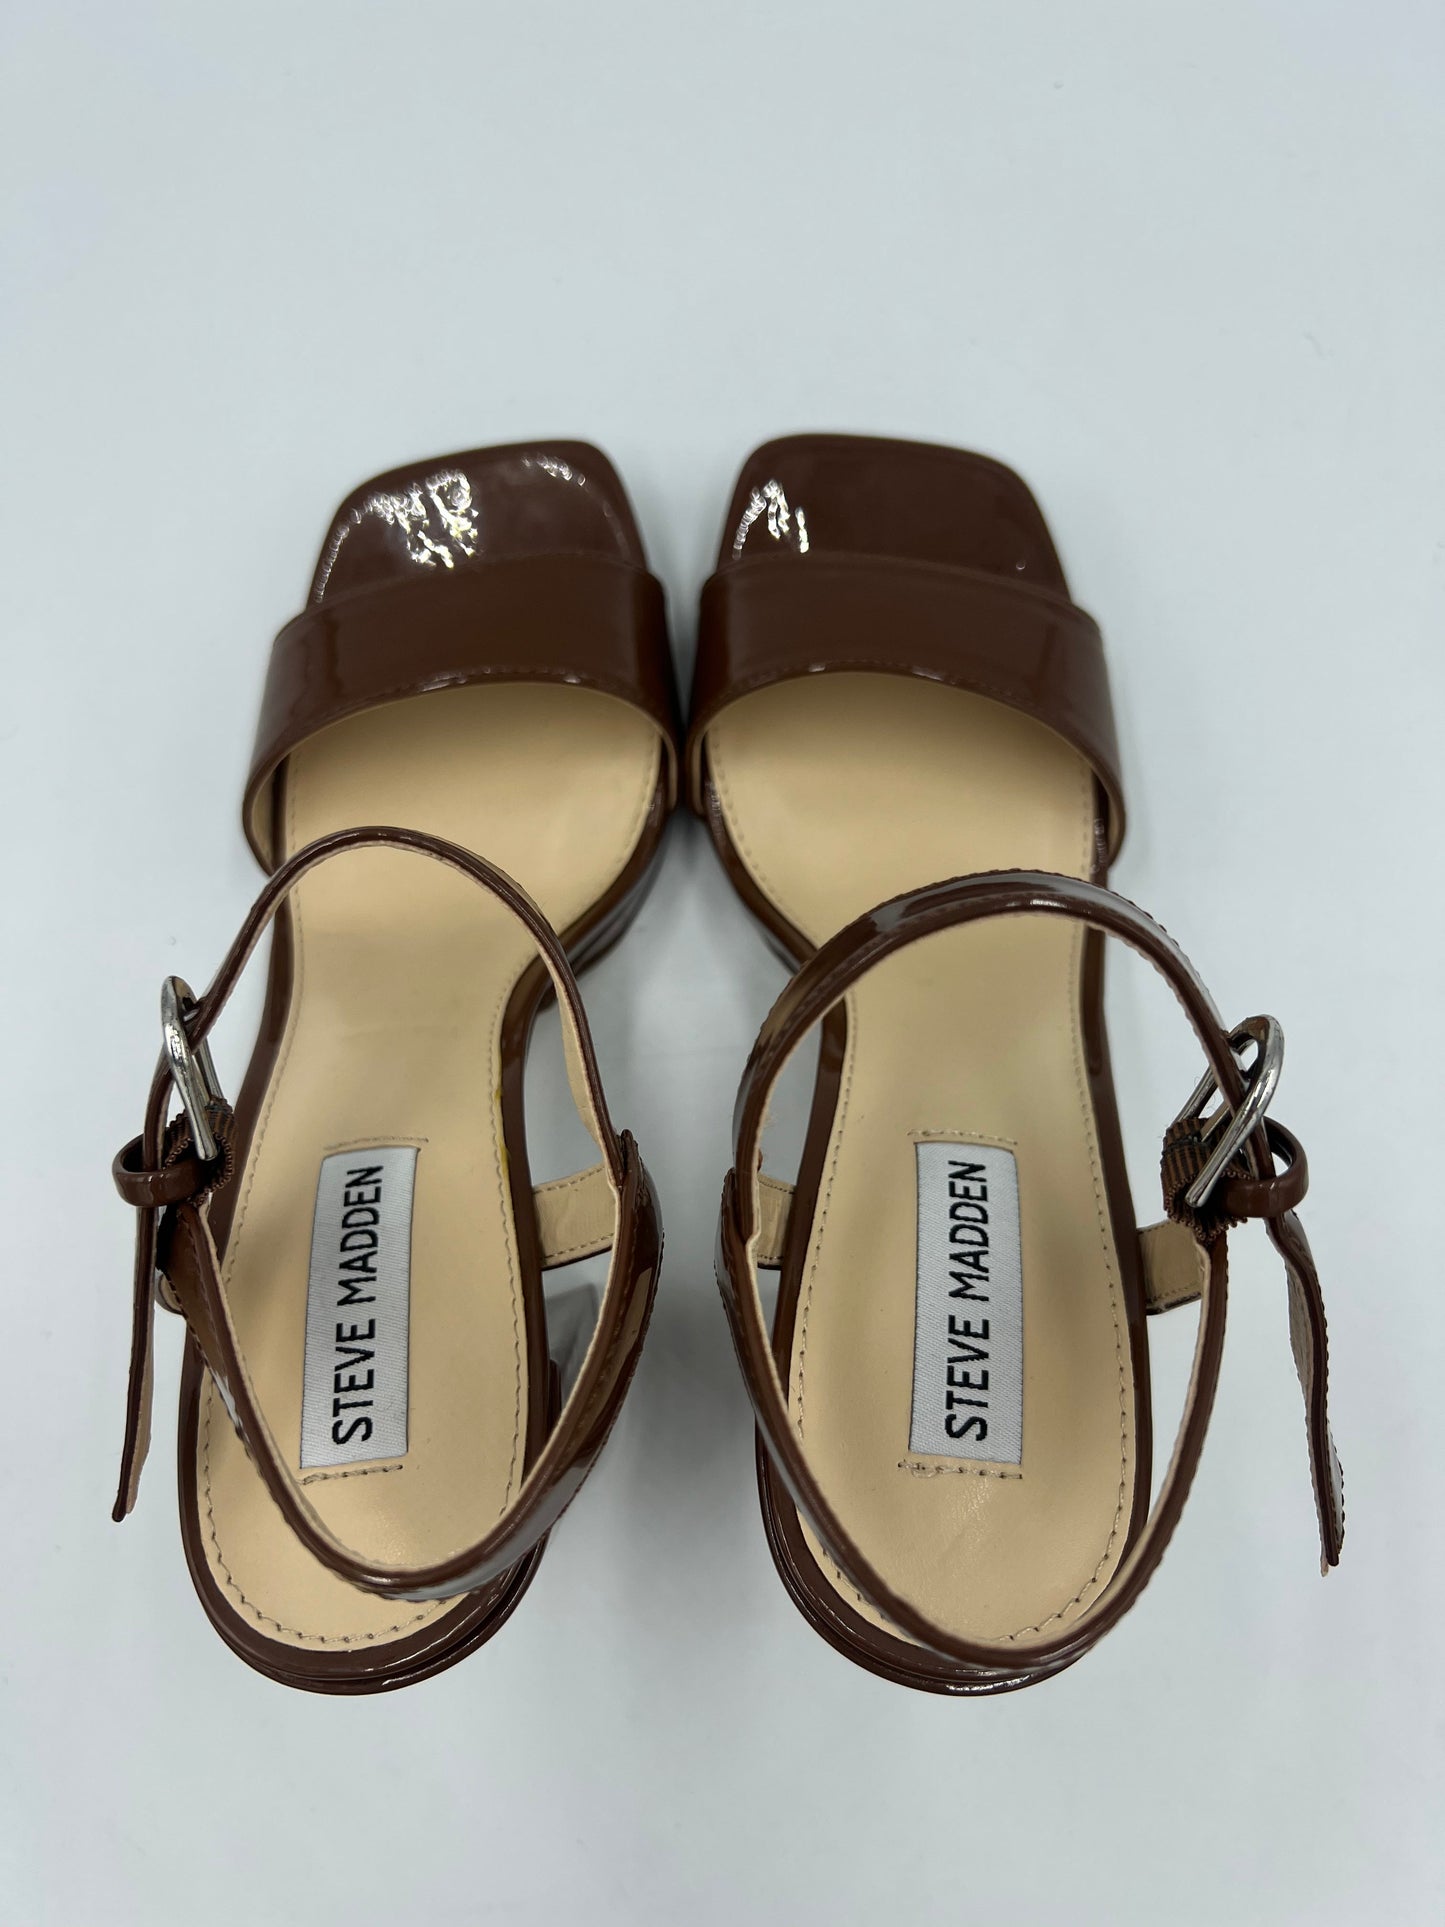 Like New! Brown Shoes Heels Block Steve Madden, Size 8.5